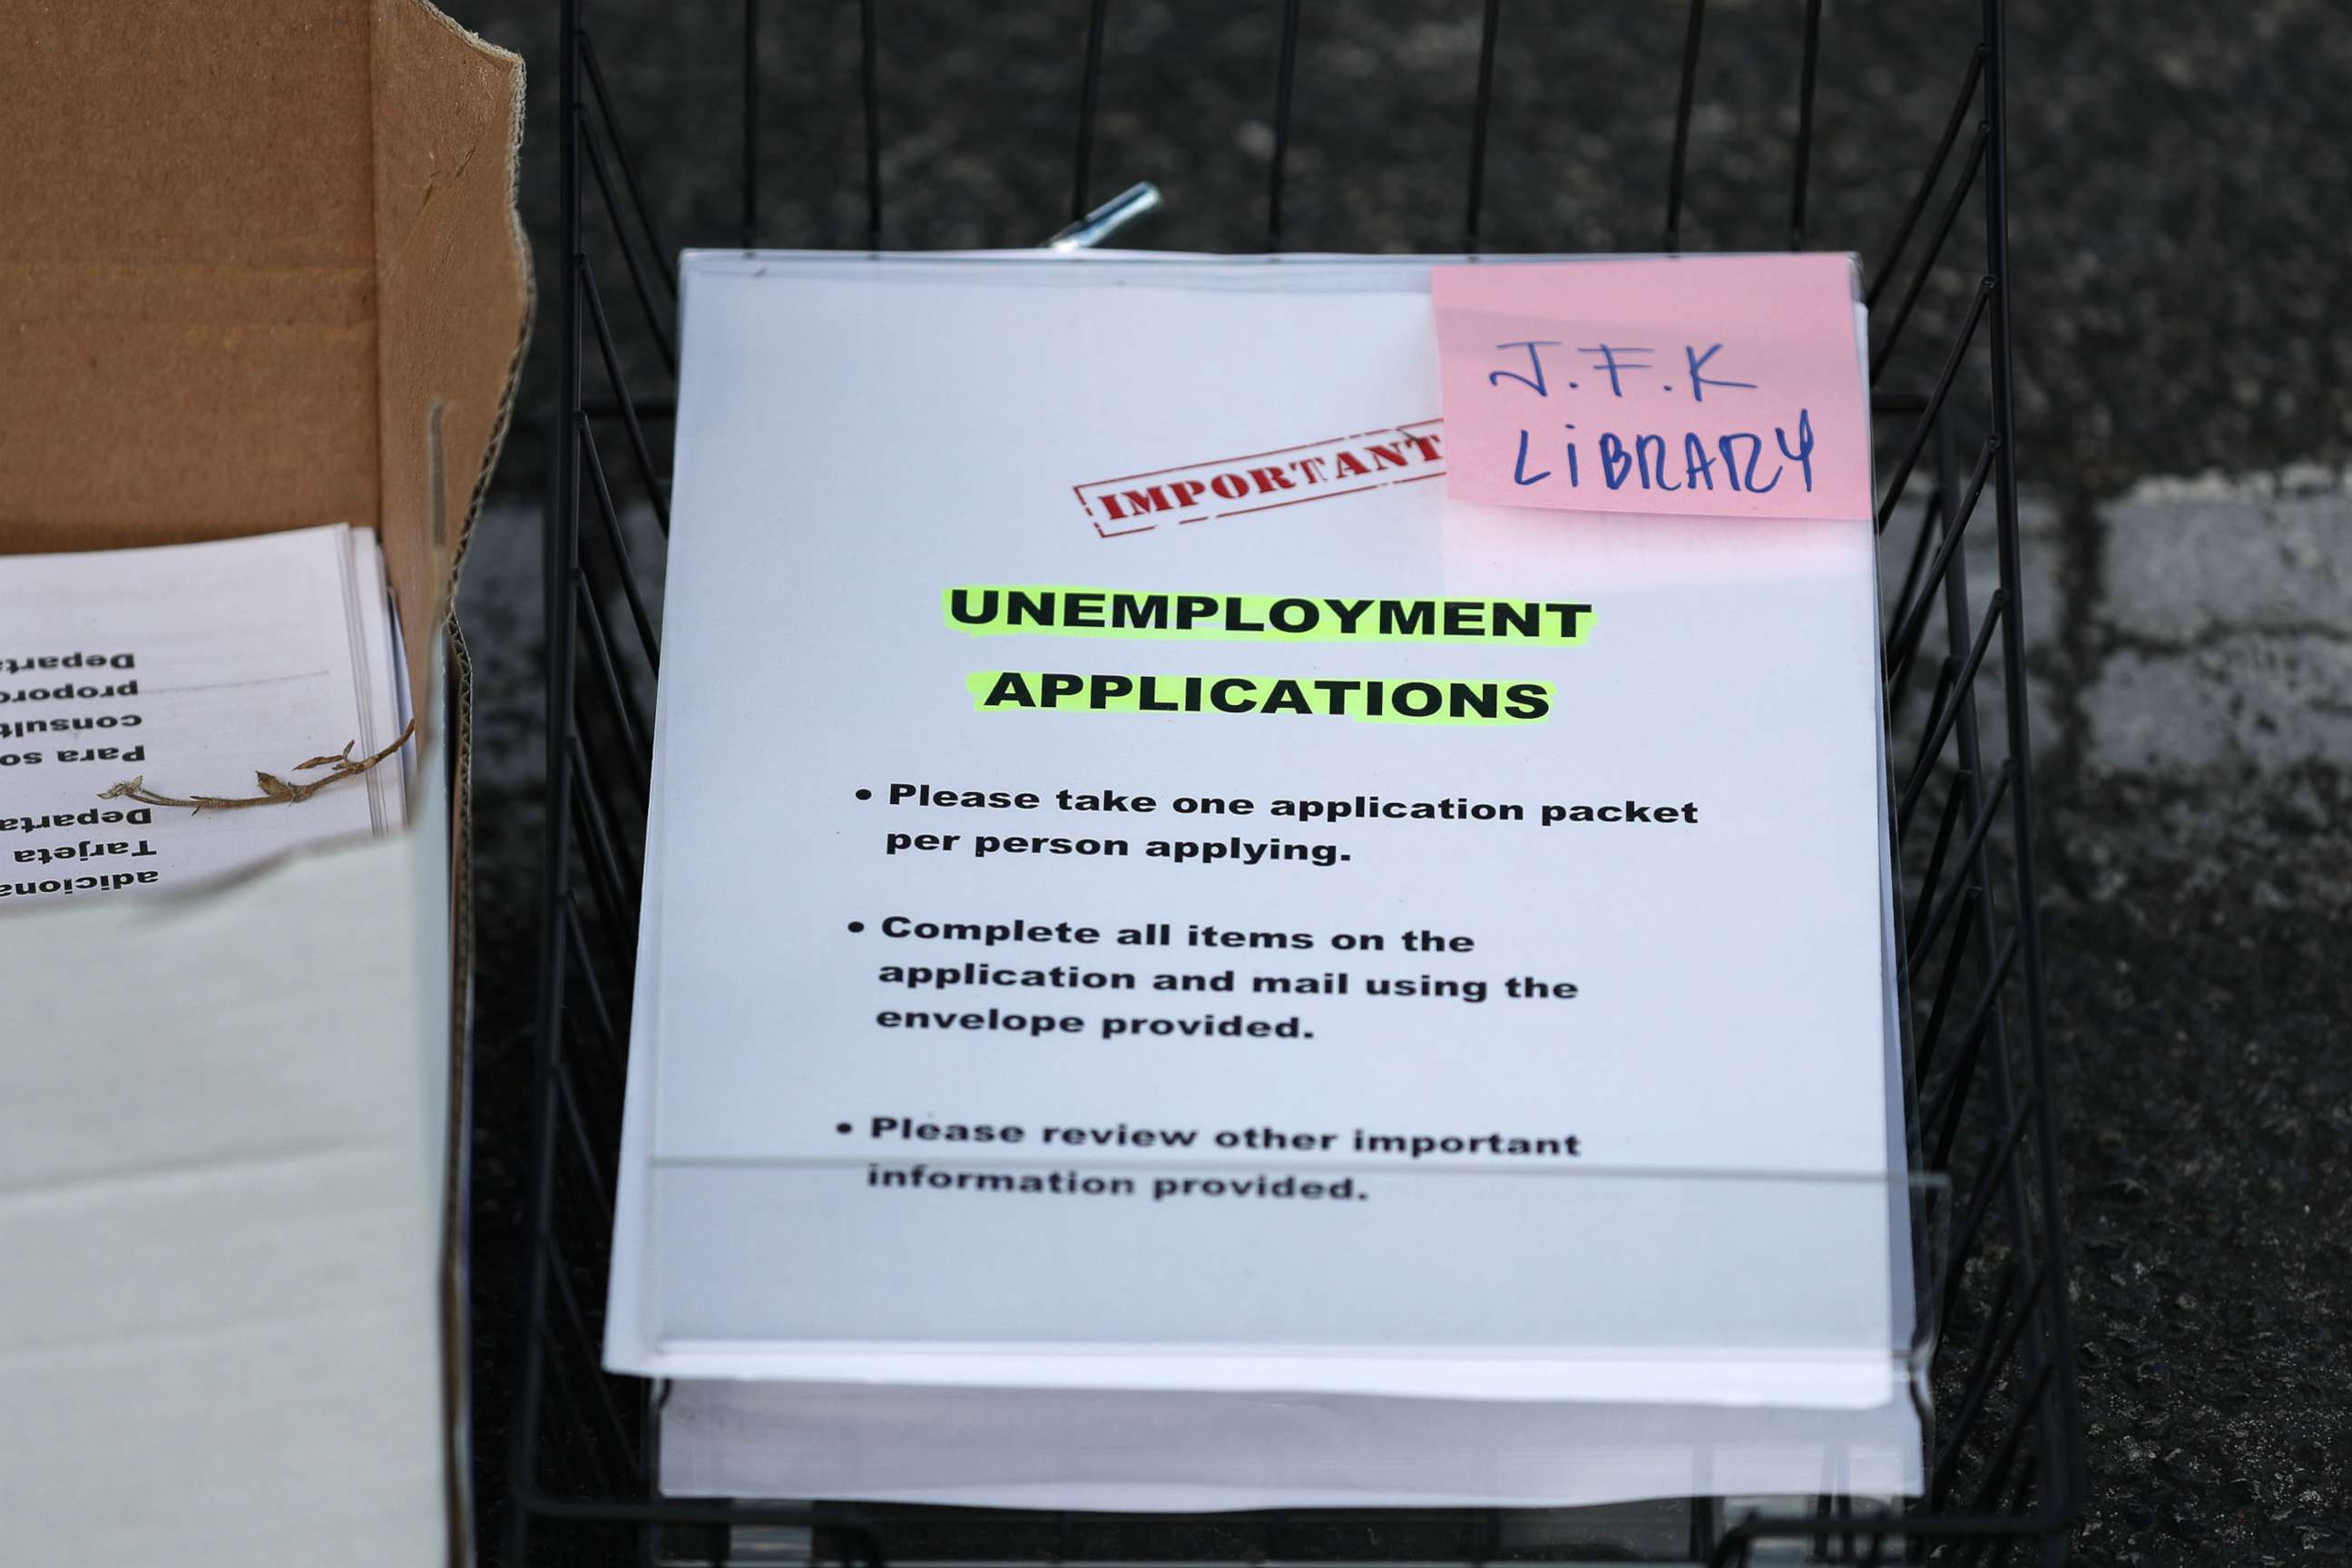 PHOTO: Unemployment applications are  seen as City of Hialeah employees hand them out to people in front of the John F. Kennedy Library, April 8, 2020, in Hialeah, Fla.